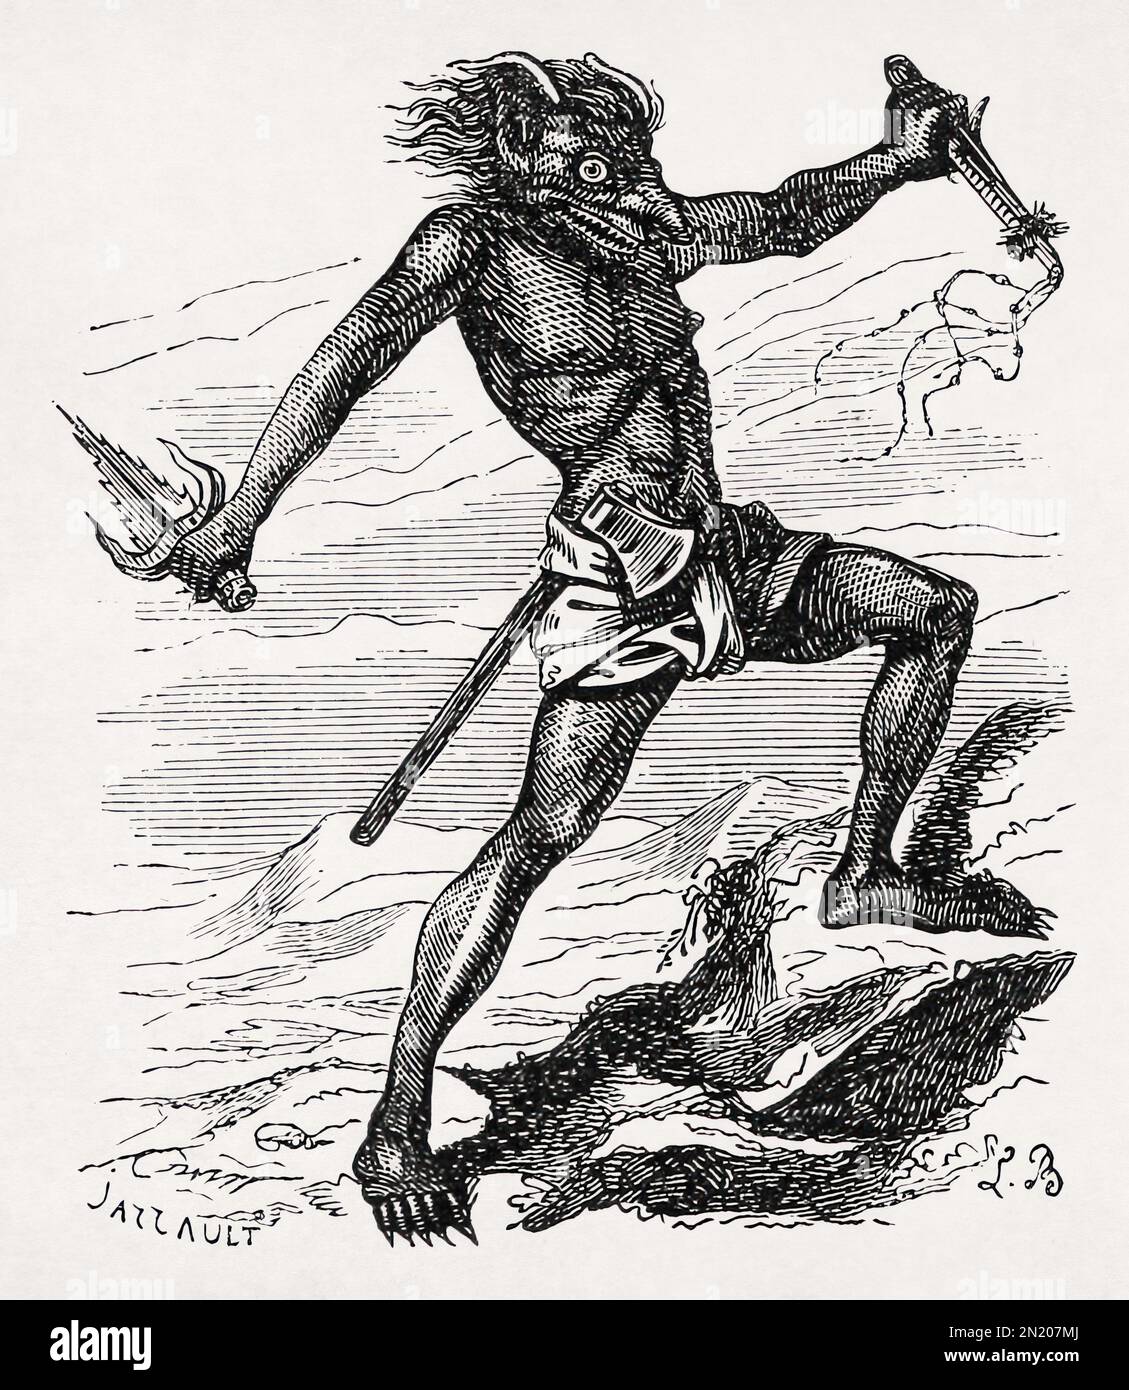 Alastor by Louis Le Breton made in 1863 for the Dictionnaire infernal writen by Jacques Collin de Plancy. Stock Photo